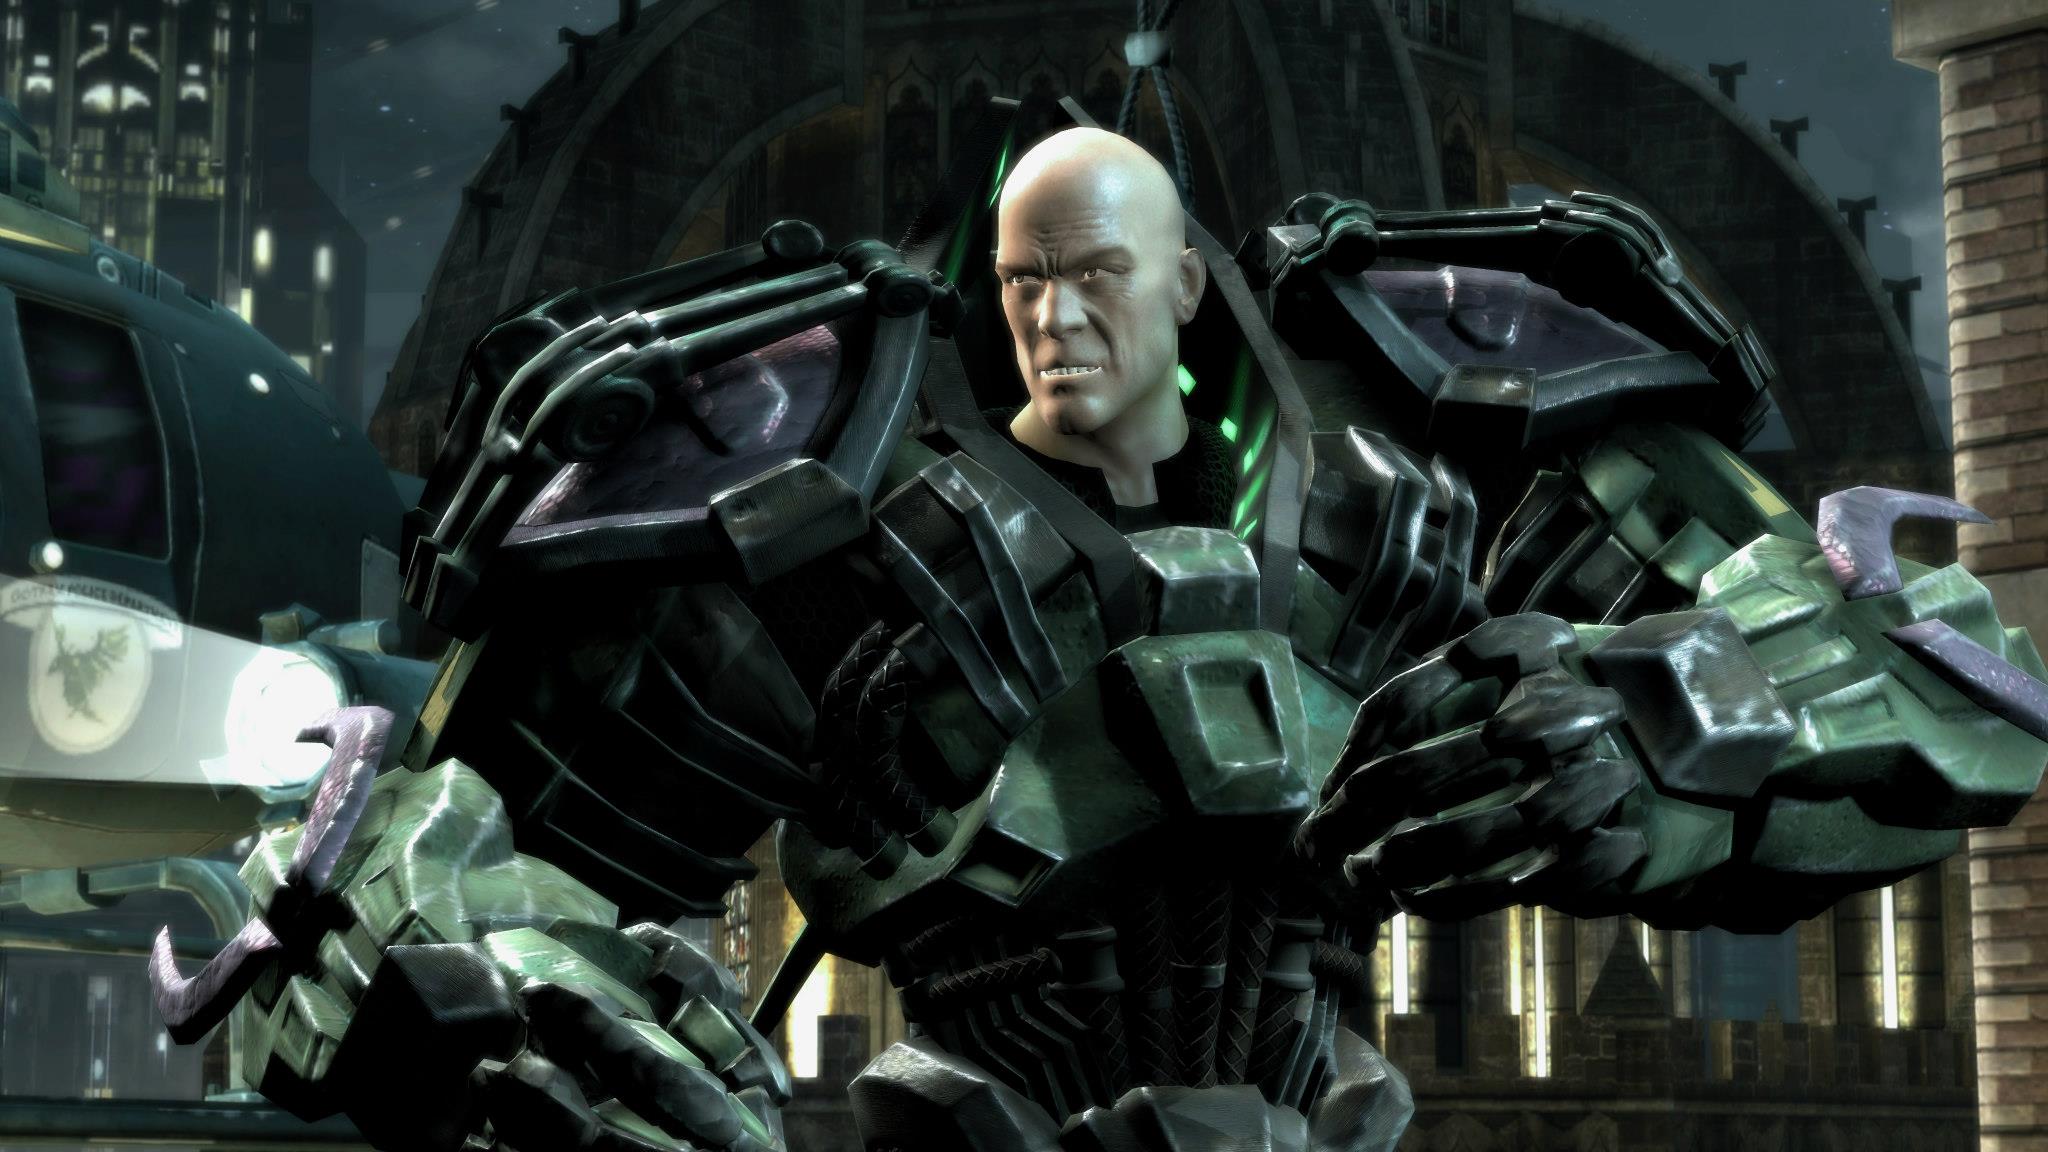 injustice-gods-among-us-lex-luthor-primary-costume-concept 